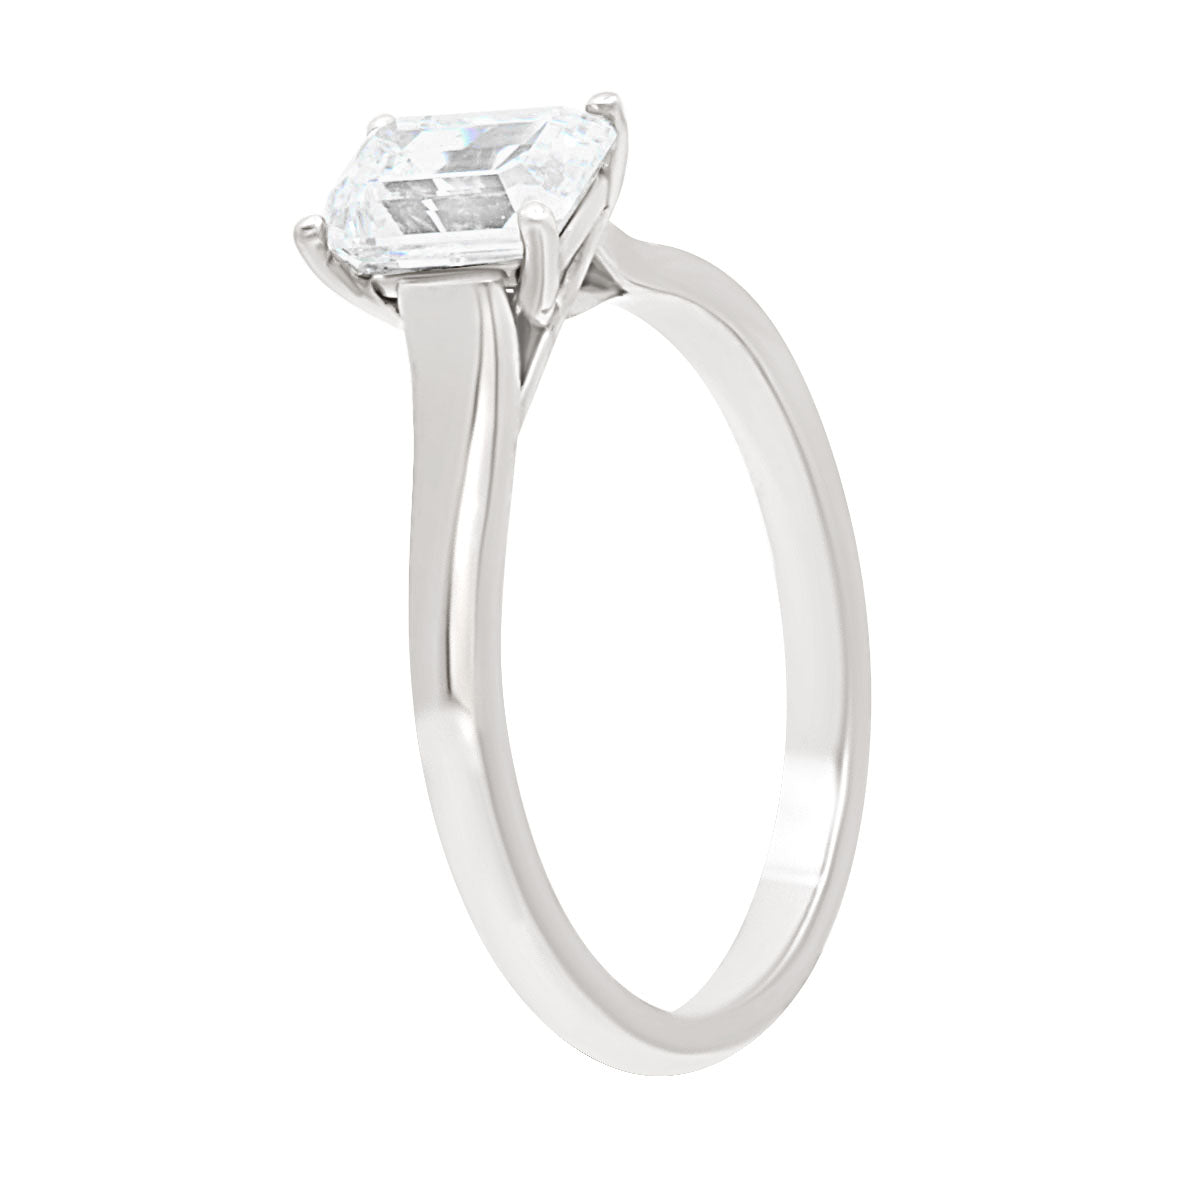 Emerald cut solitaire engagement ring in white gold in an angled position